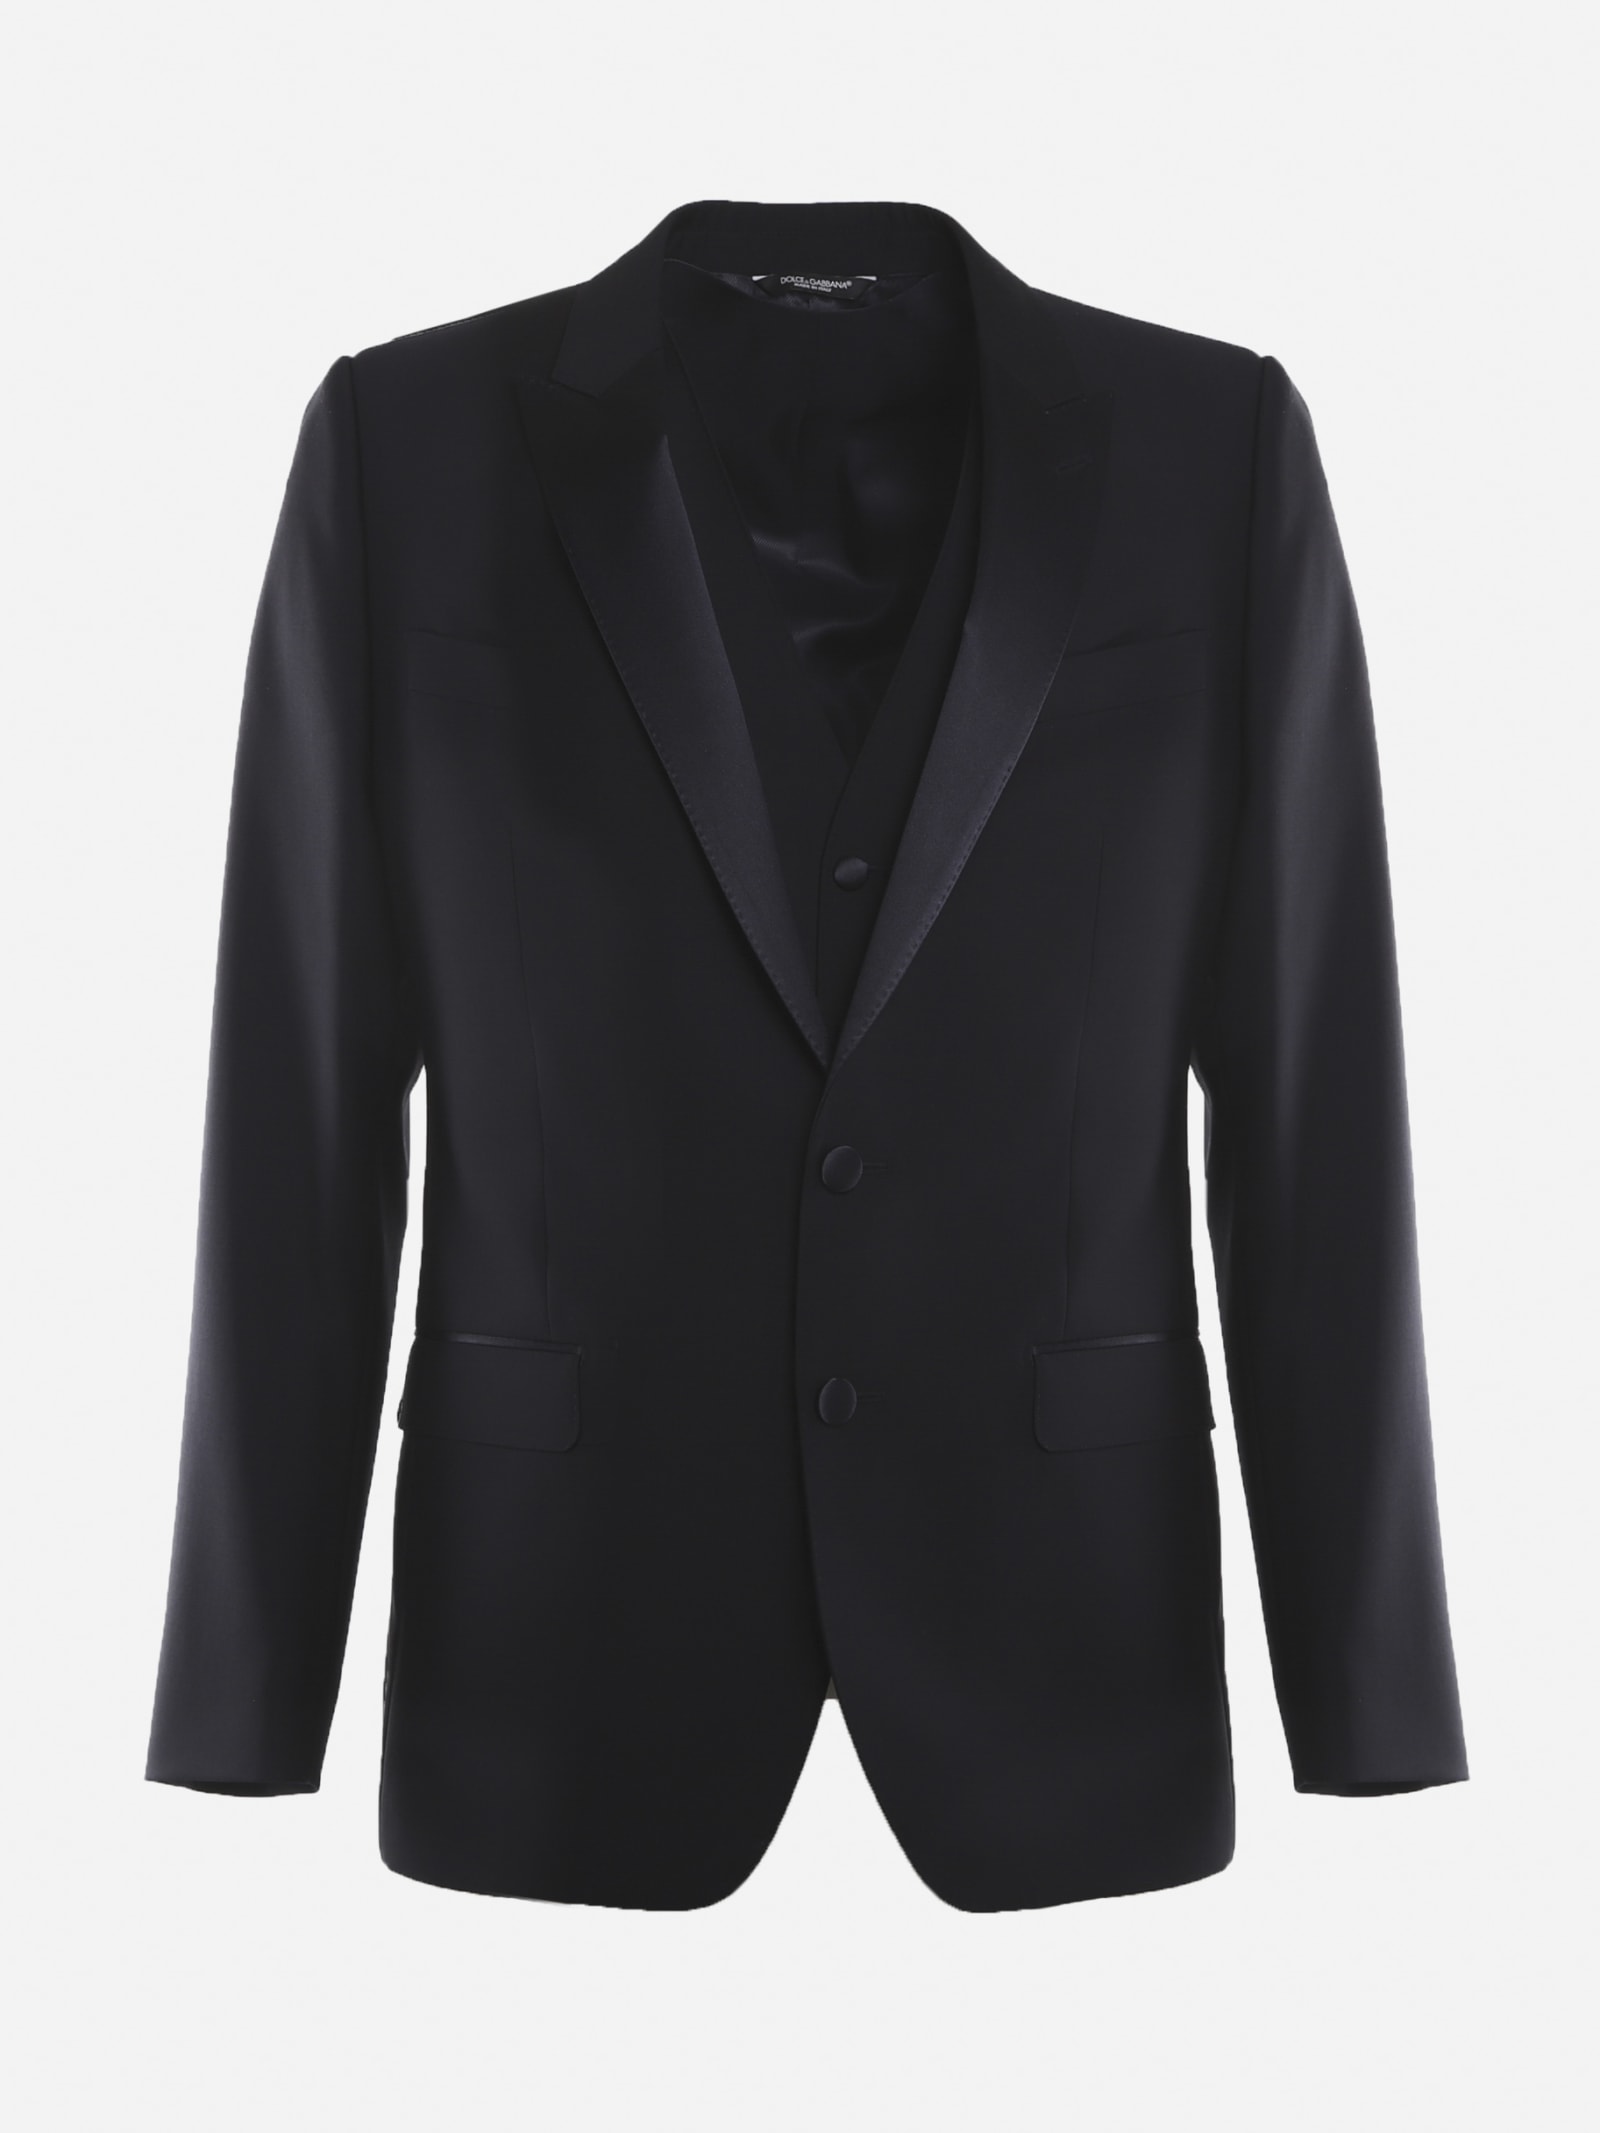 Dolce & Gabbana Suit Made Of Virgin Wool With Silk Inserts